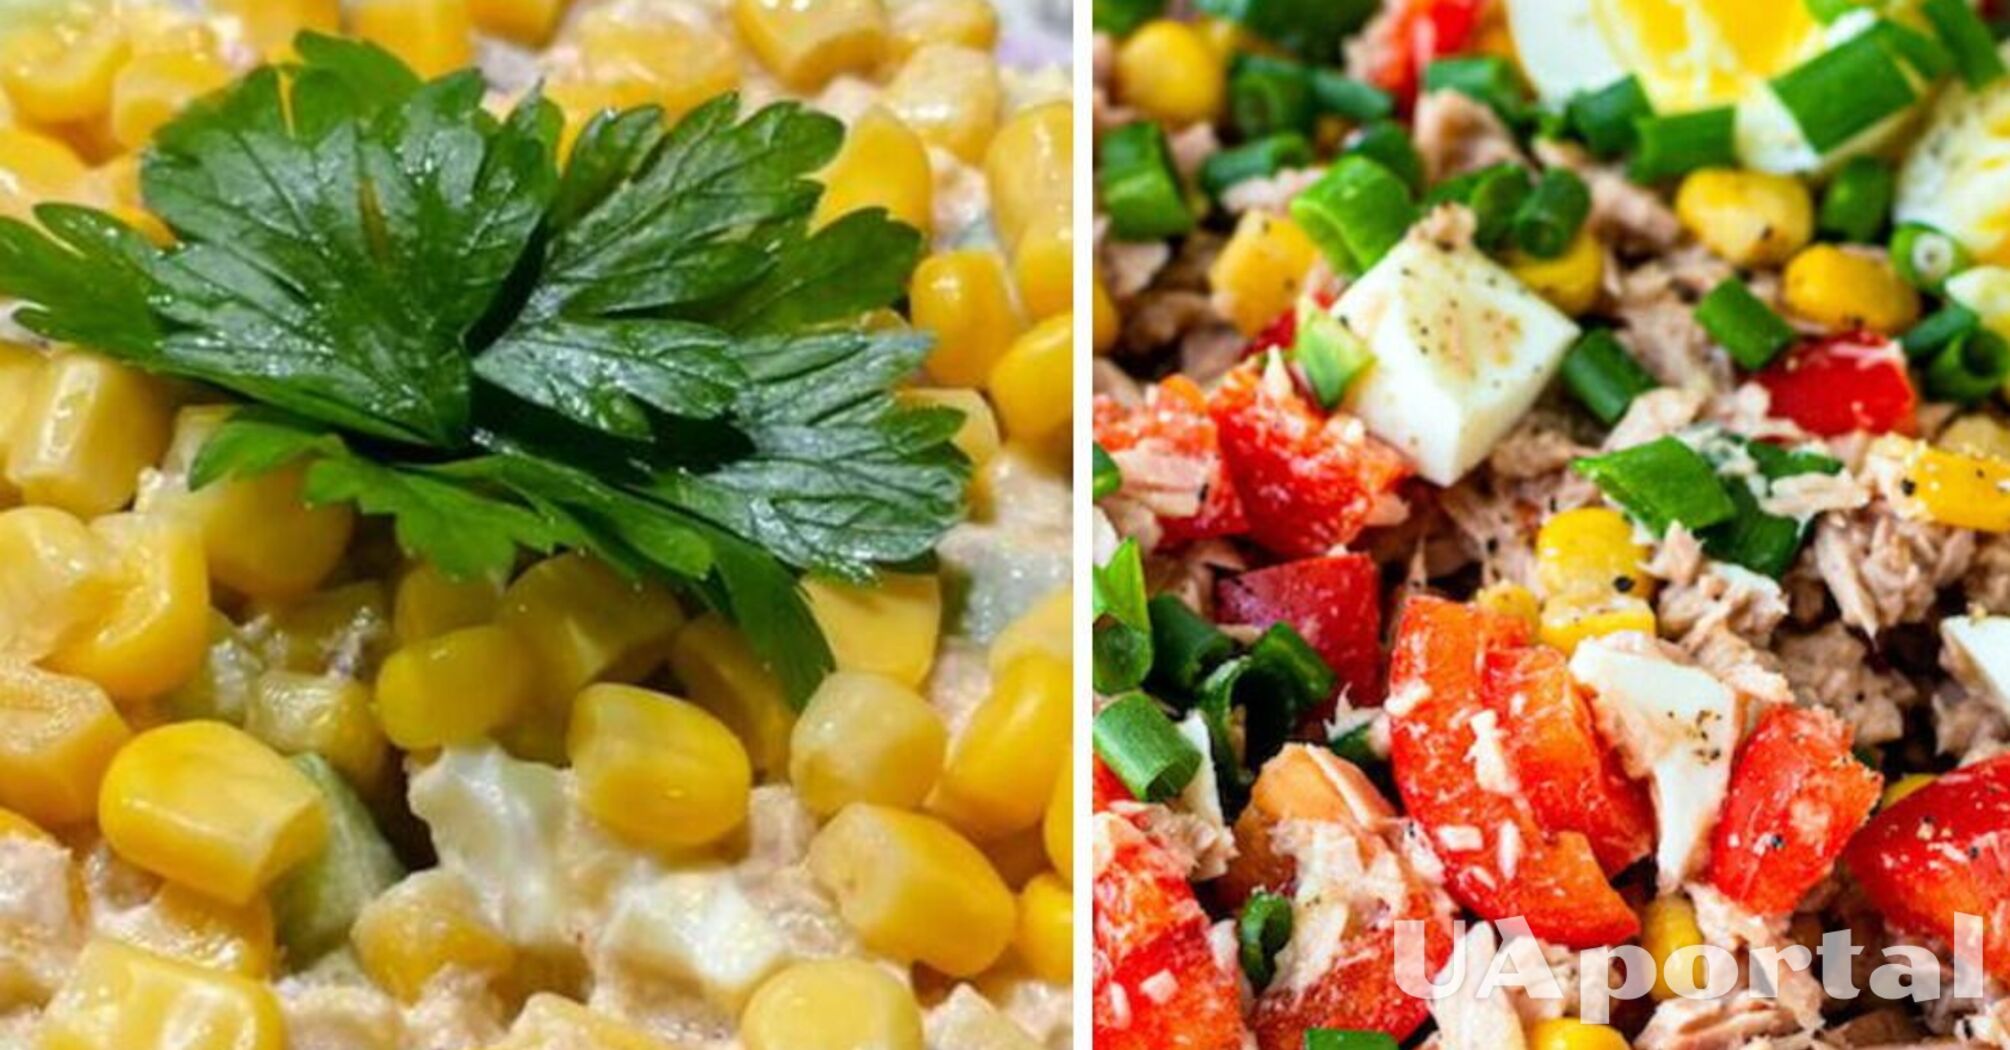 Healthy meal in 5 minutes: a recipe for tuna and corn salad